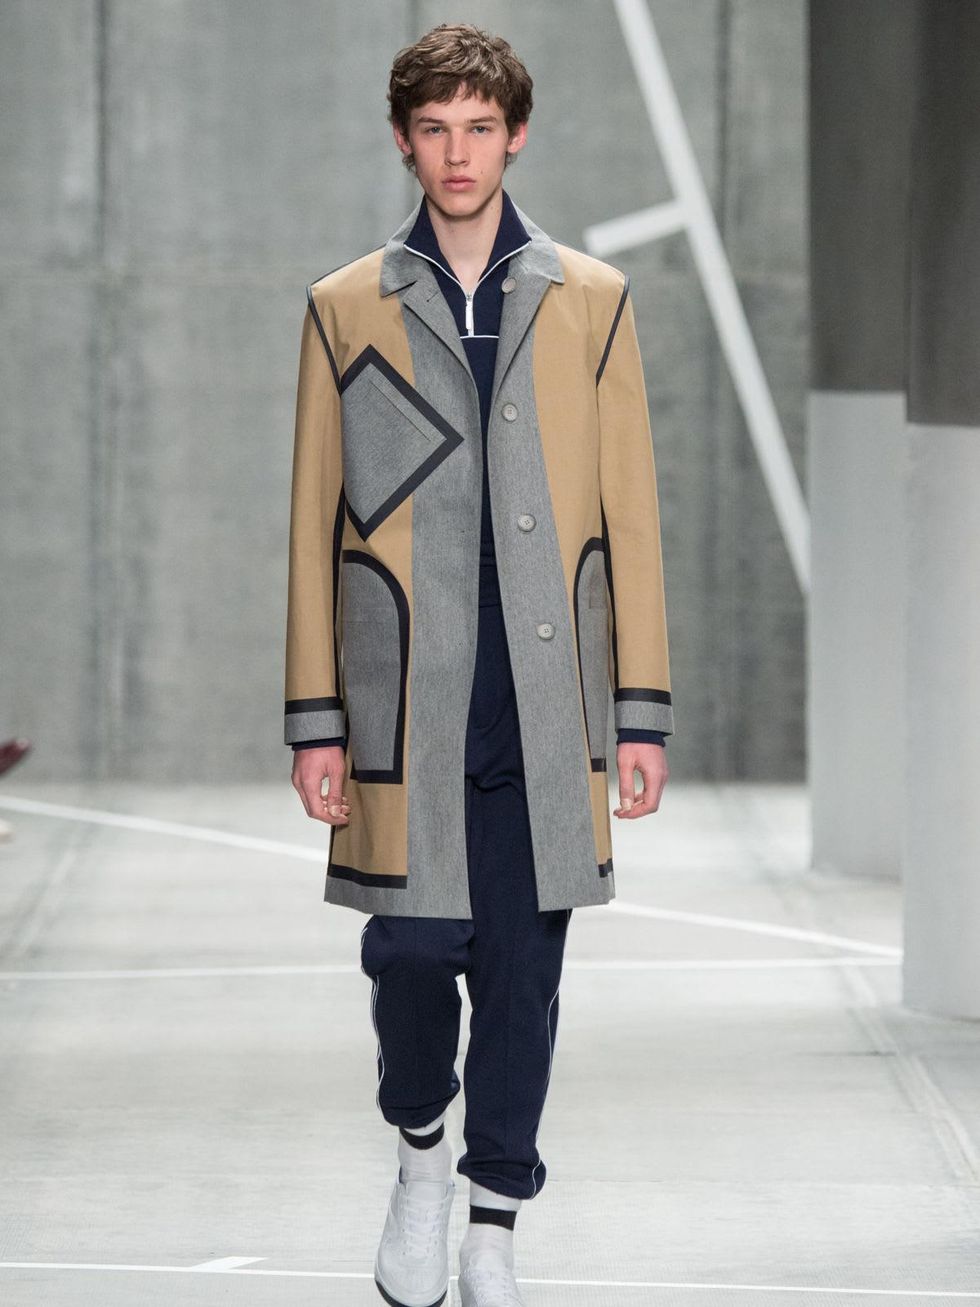 Clifford New York Fashion Week fall 2015 Lacoste April 2015 Look_004